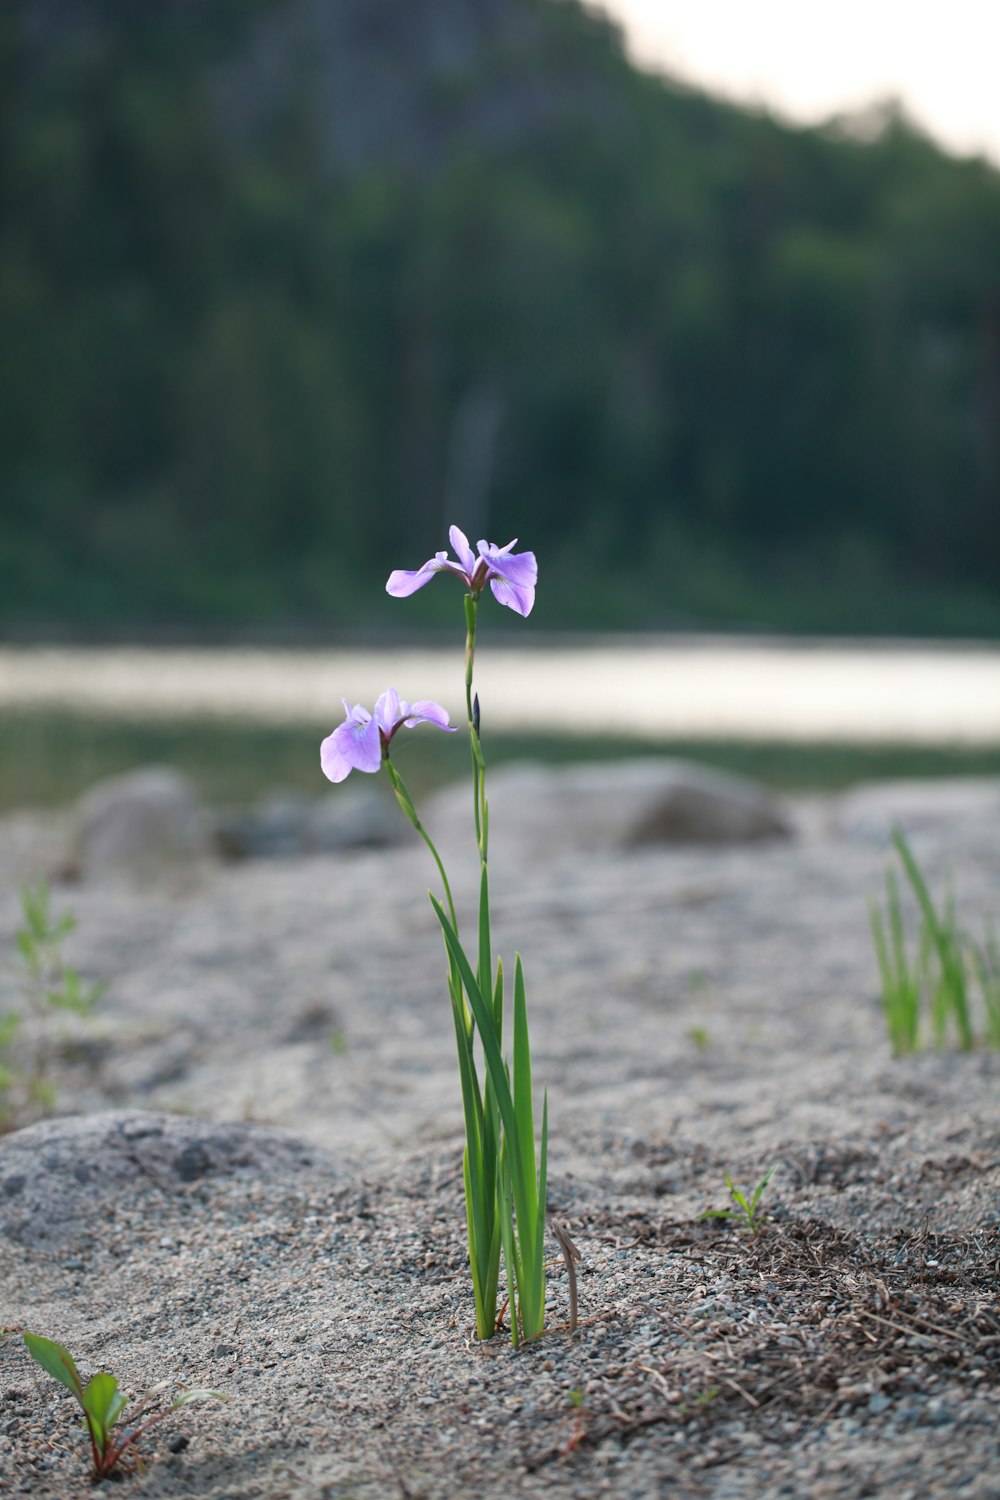 purple flower on gray rock near body of water during daytime